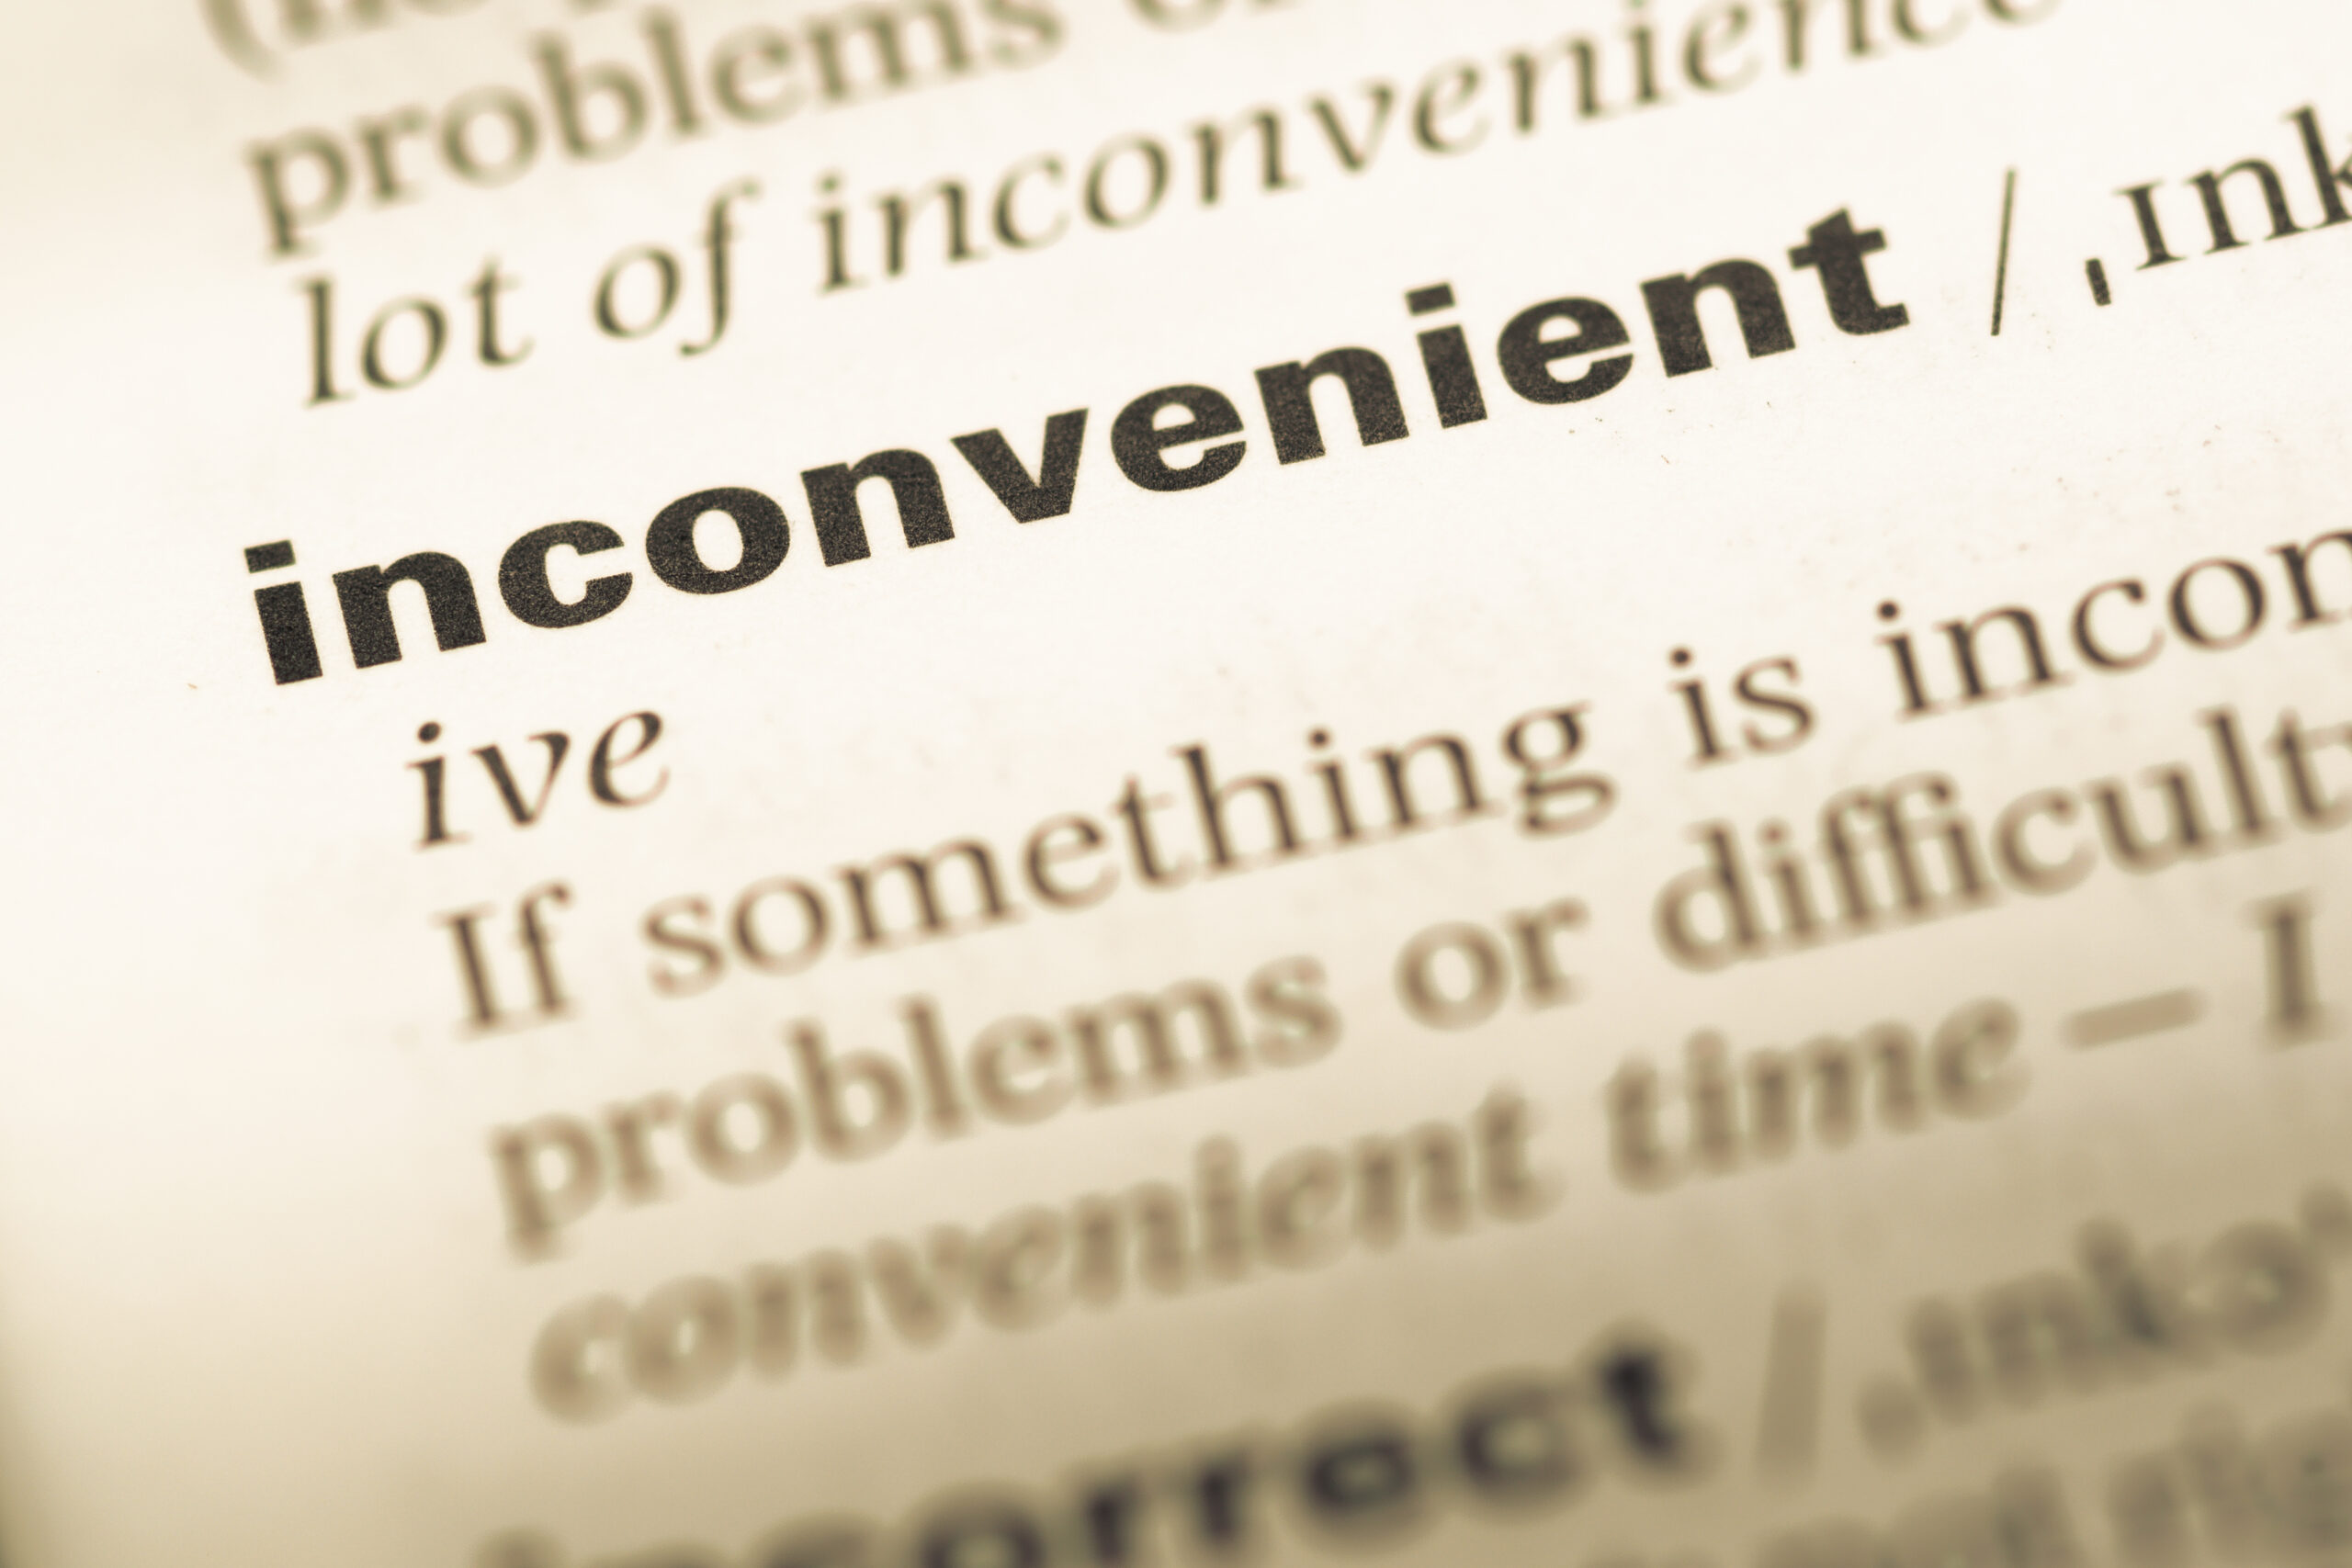 An image showing part of the dictionary definition for inconvenient [Good Fundraising Is Inconvenient!]